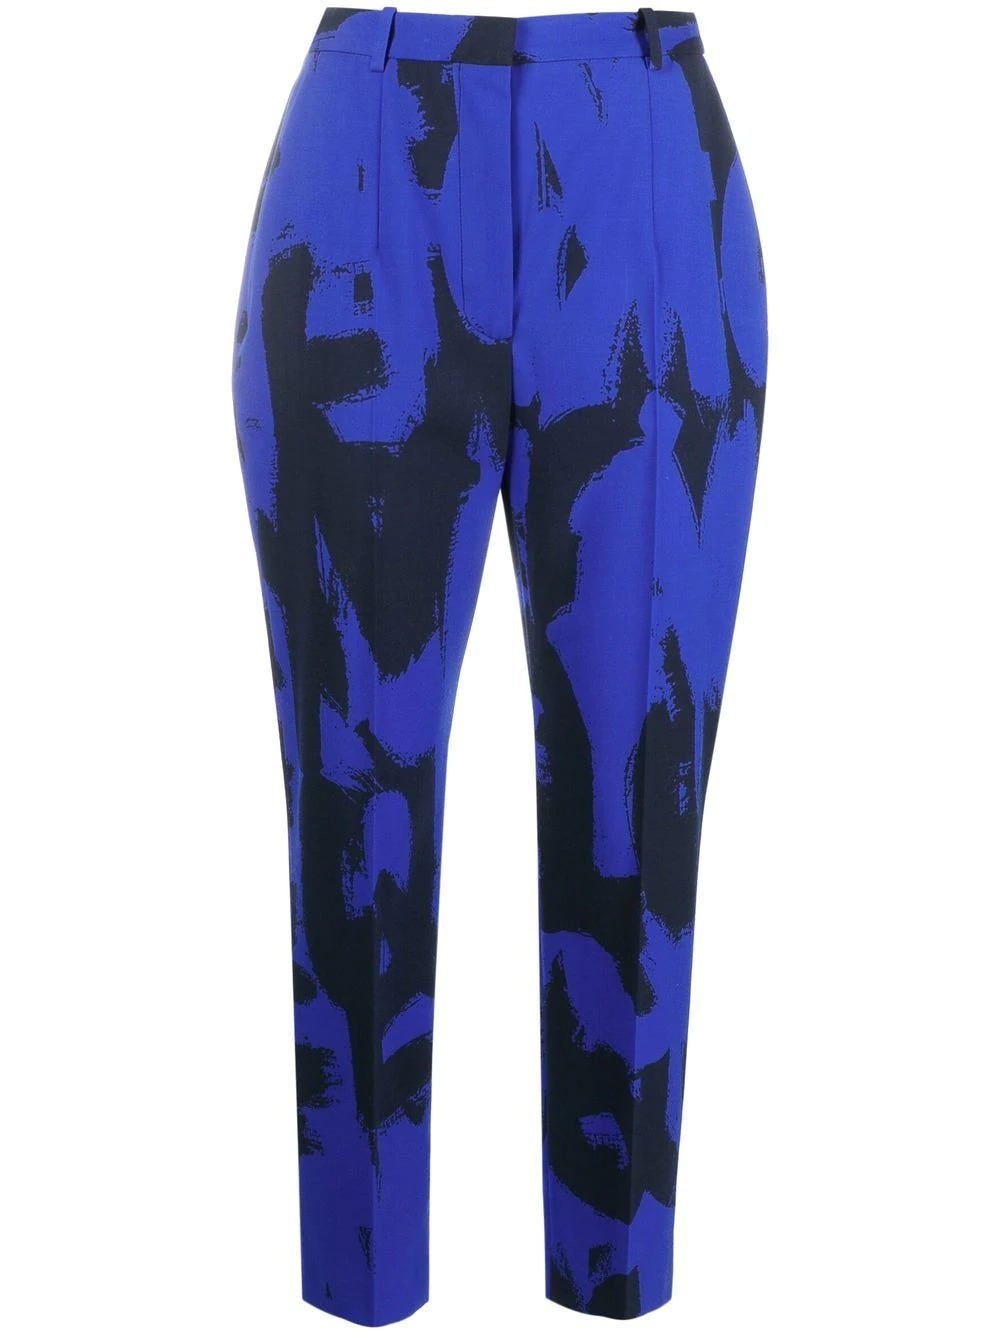 ALEXANDER MCQUEEN MULTICOLORED TAILORED HIGH-WAISTED PANTS